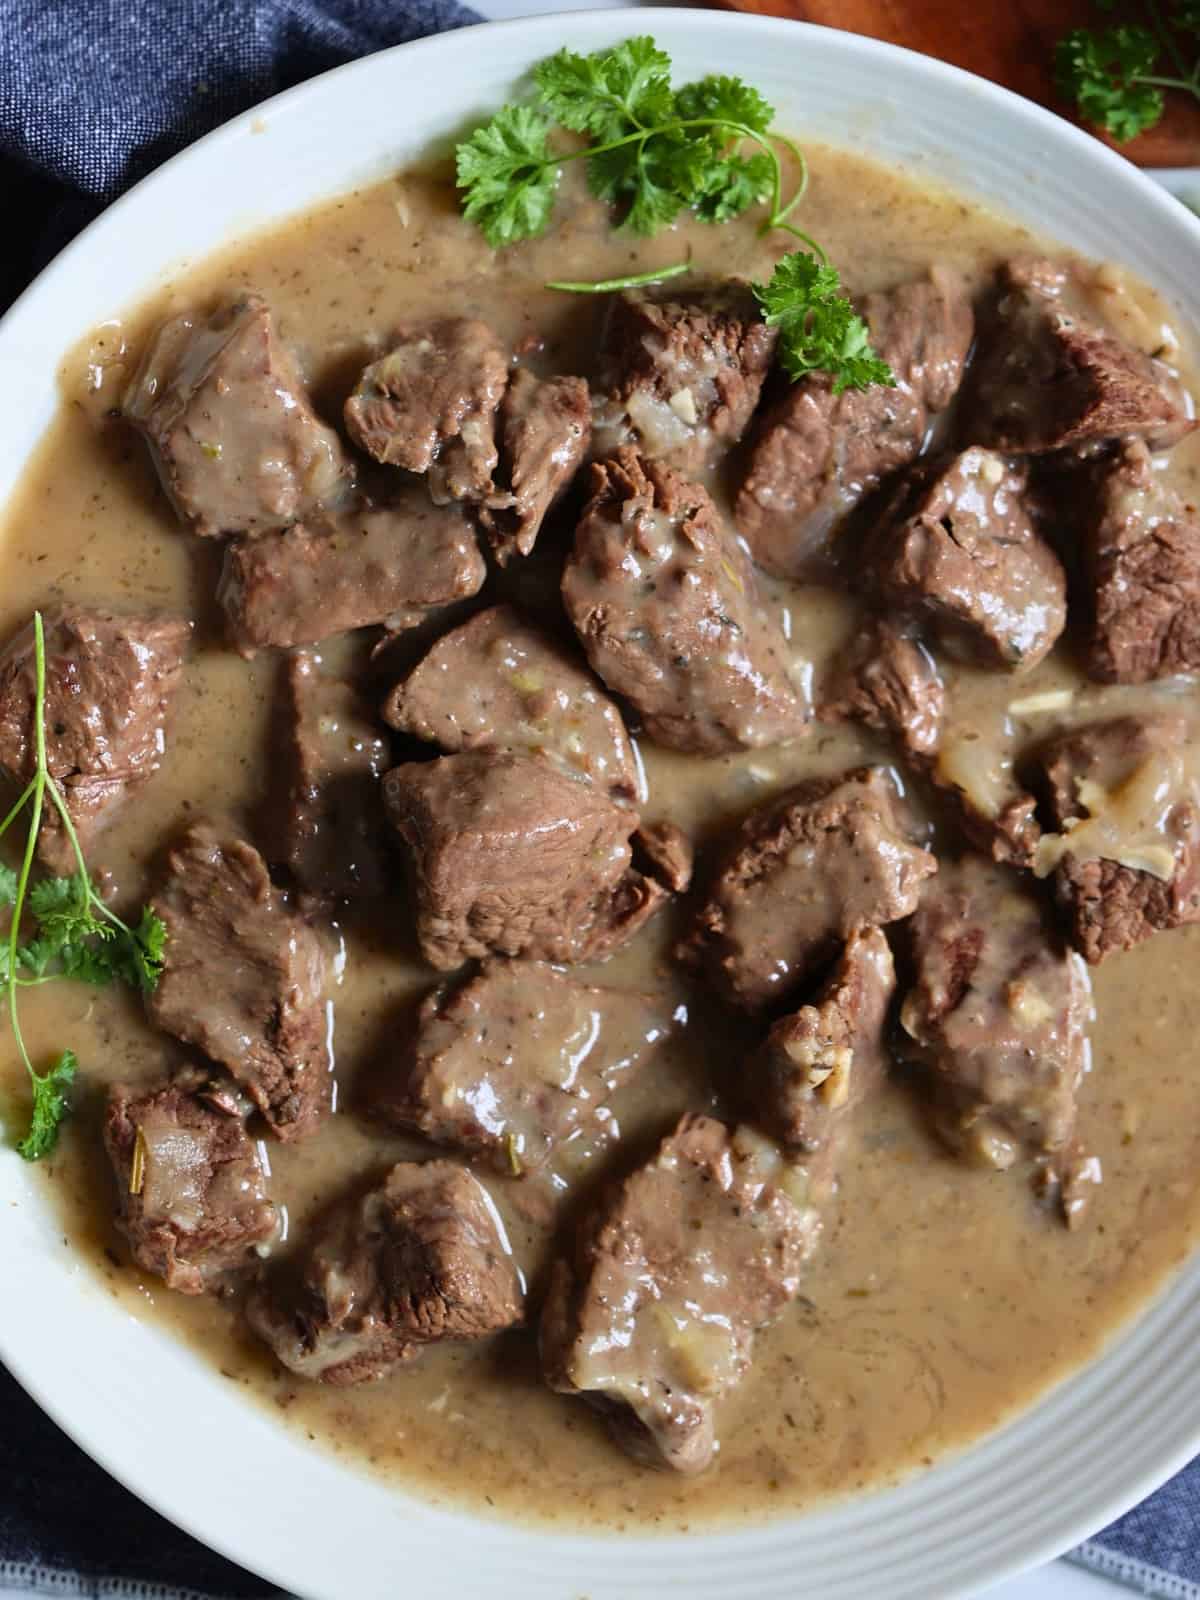 Instant pot beef tips in gravy garnished with herbs on a plate